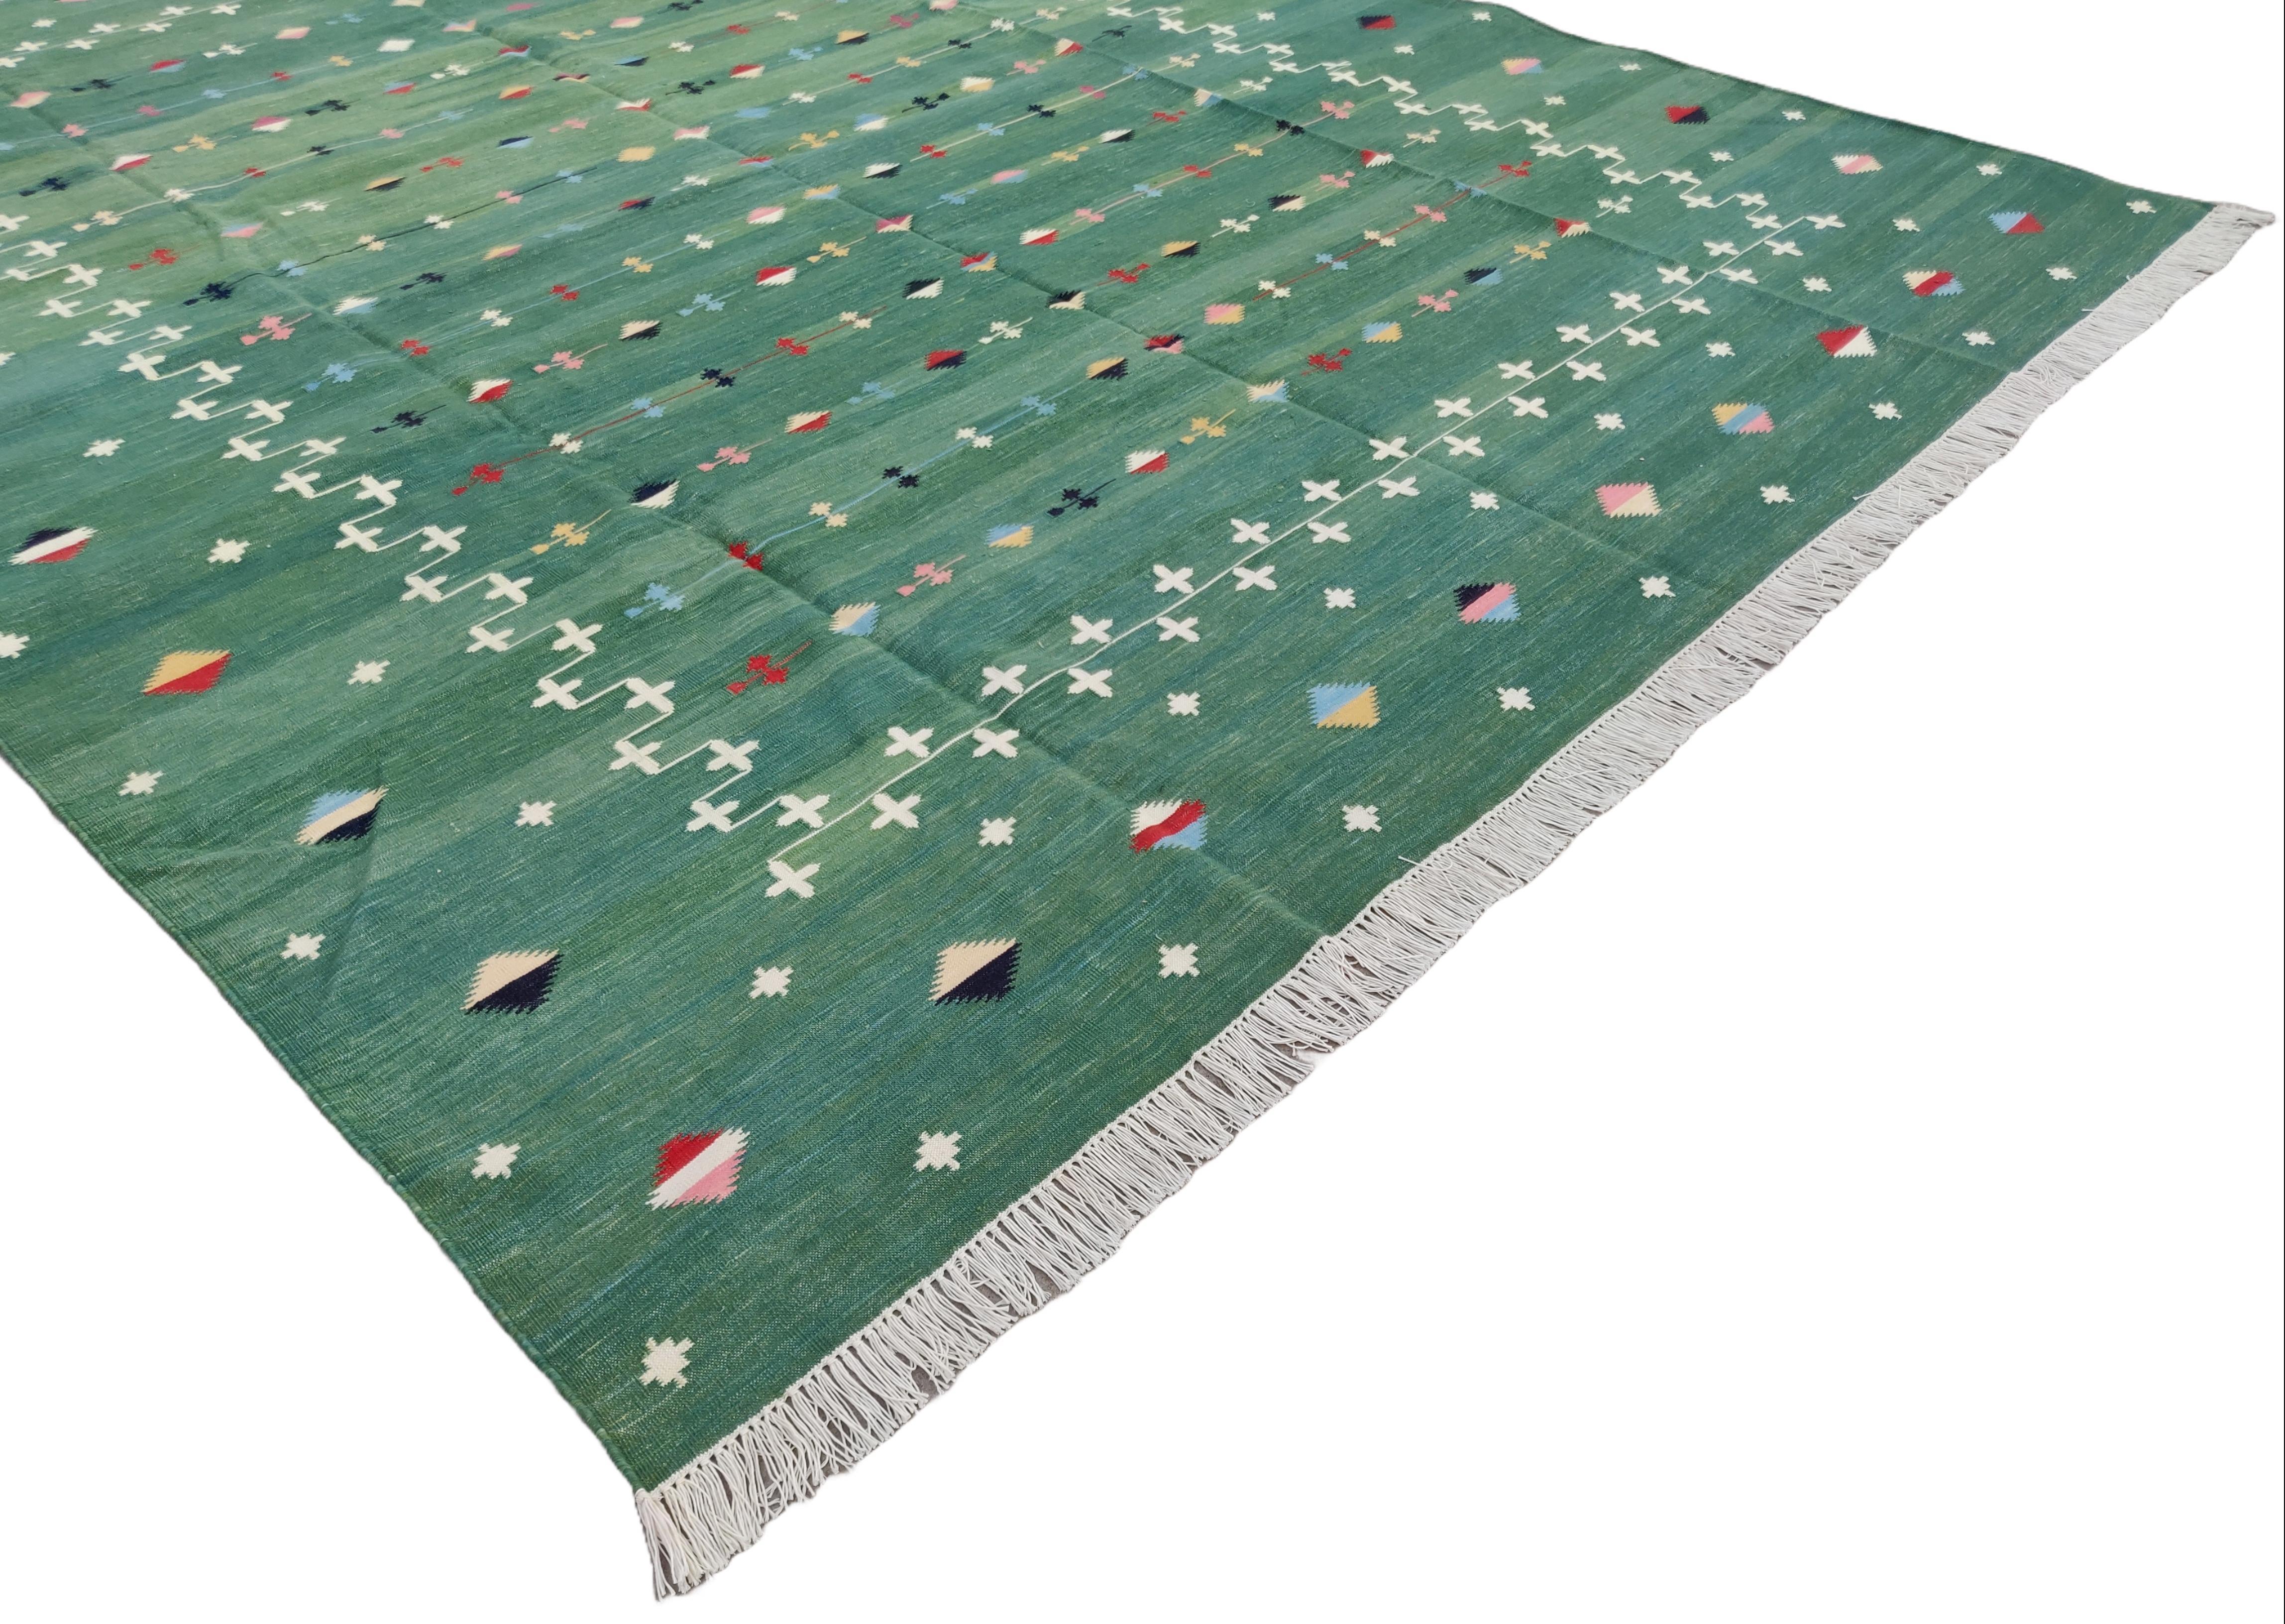 Cotton Vegetable Dyed Forest Green And White Shooting Star Rug-10'x14'
These special flat-weave dhurries are hand-woven with 15 ply 100% cotton yarn. Due to the special manufacturing techniques used to create our rugs, the size and color of each